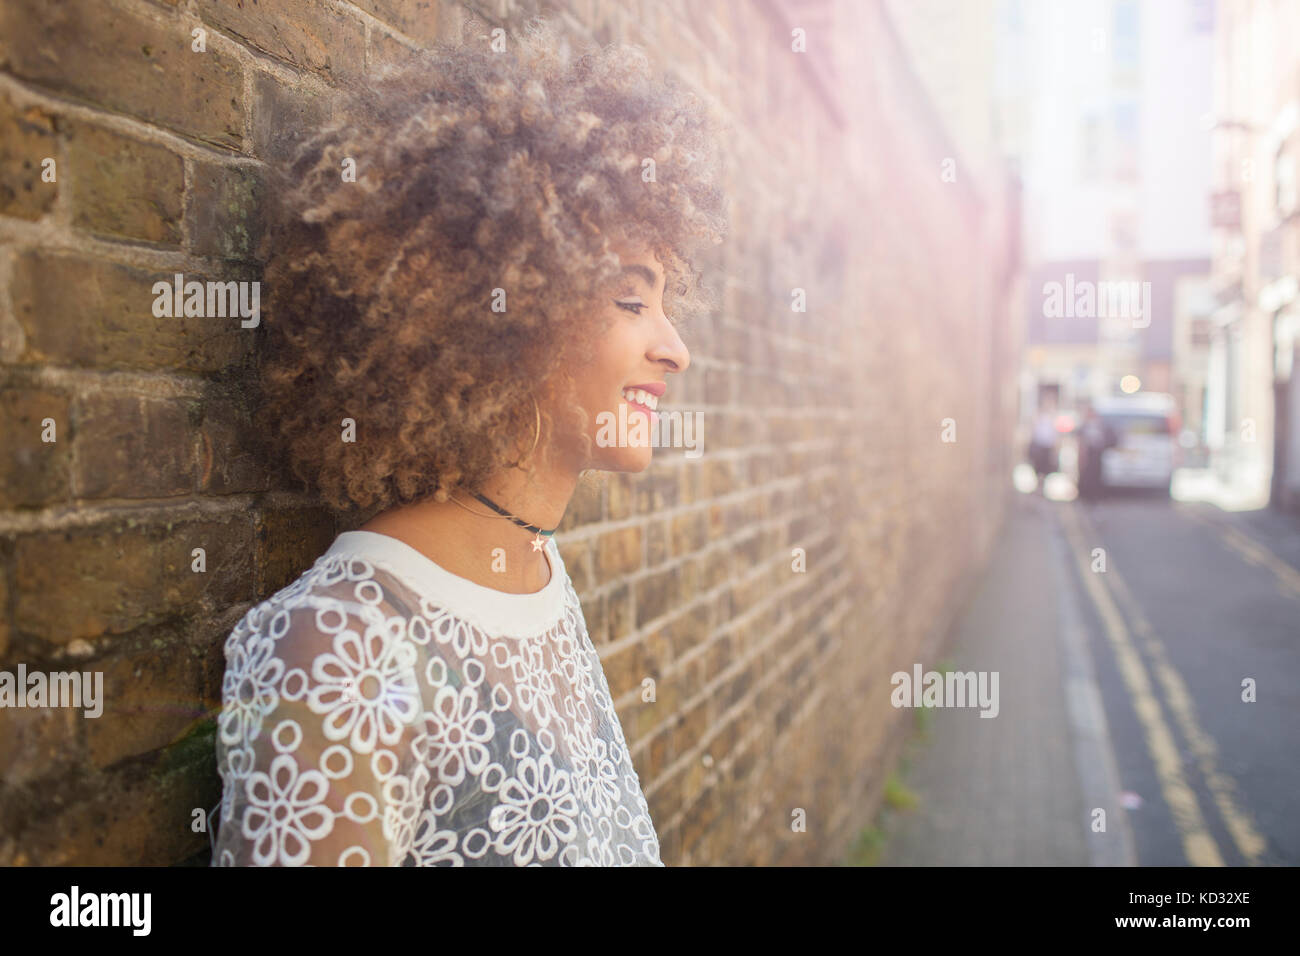 Young woman leaning against wall, smiling Banque D'Images